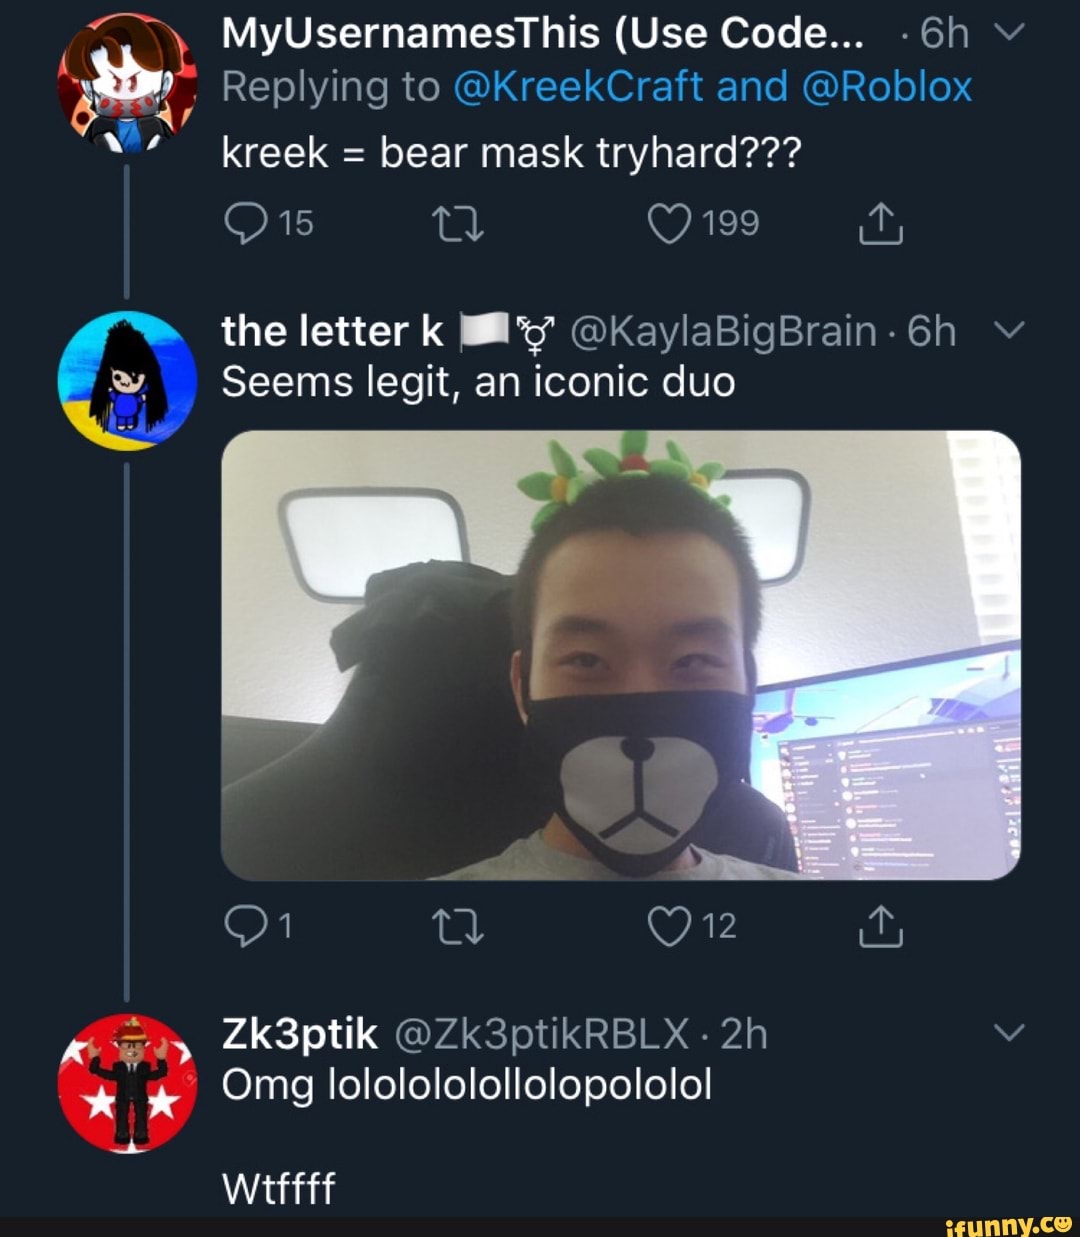 Myusernamesthis Use Code 6h Replying To Kreekcraft And Roblox Kreek Bear Mask Tryhard The Letter K By Okaylabigbrain 6h Y Seems Legit An Iconic Duo Omg Lololololollolopololo Ifunny - roblox mask code